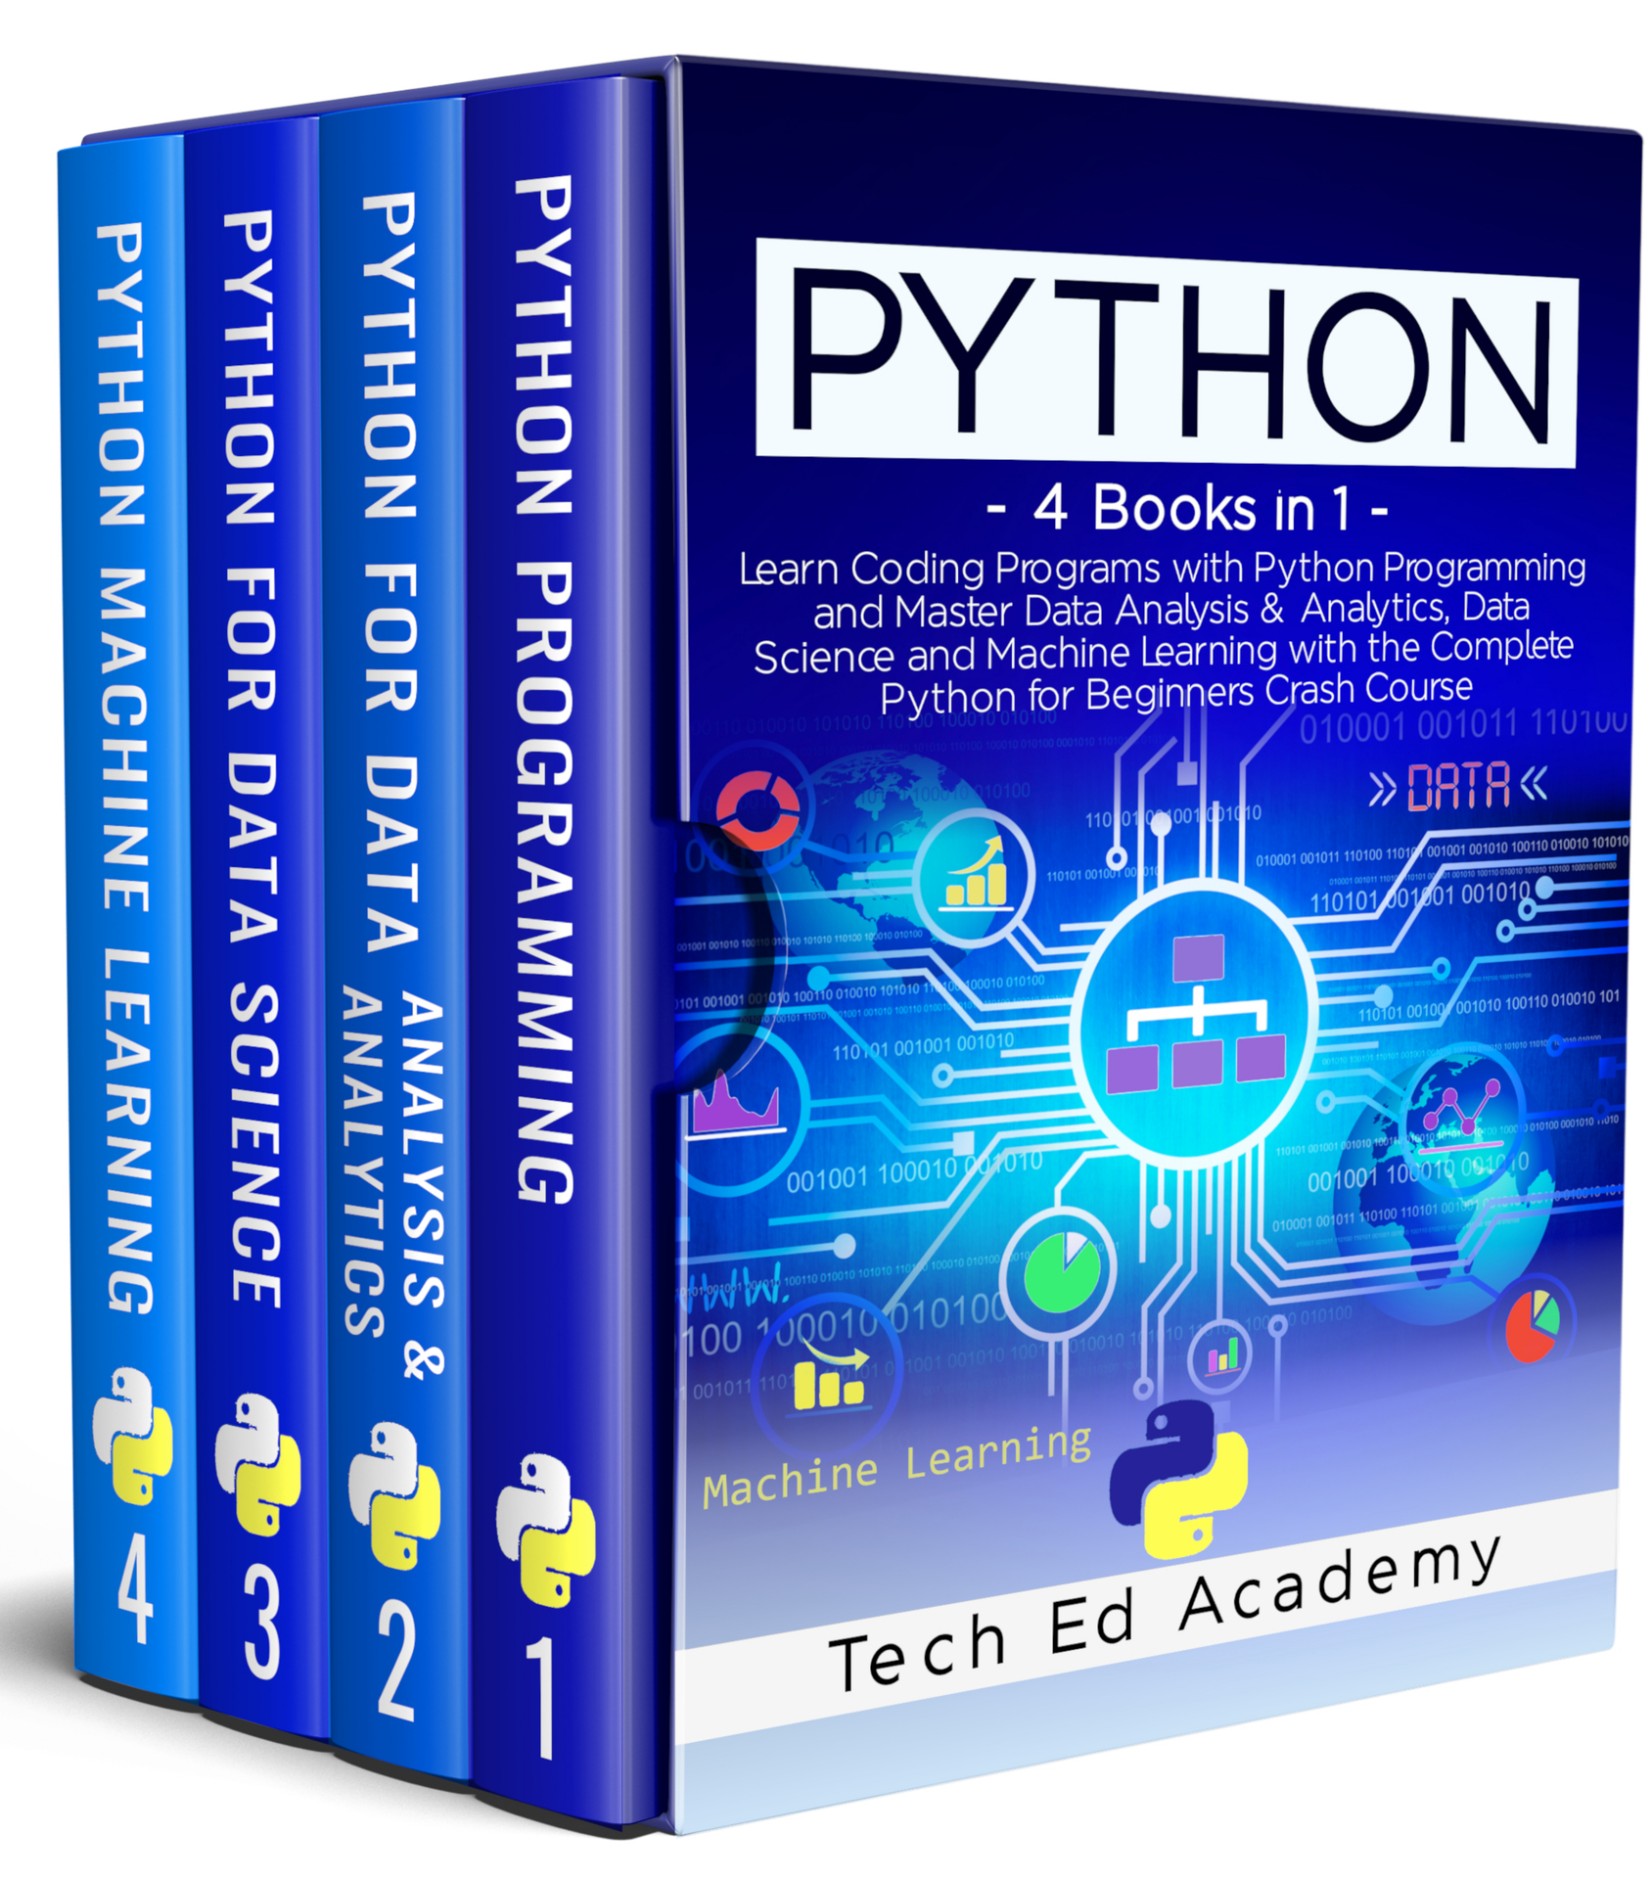 Python: Learn Coding Programs with Python Programming and Master Data Analysis & Analytics, Data Science and Machine Learning with the Complete Python for Beginners Crash Course - 4 Books in 1